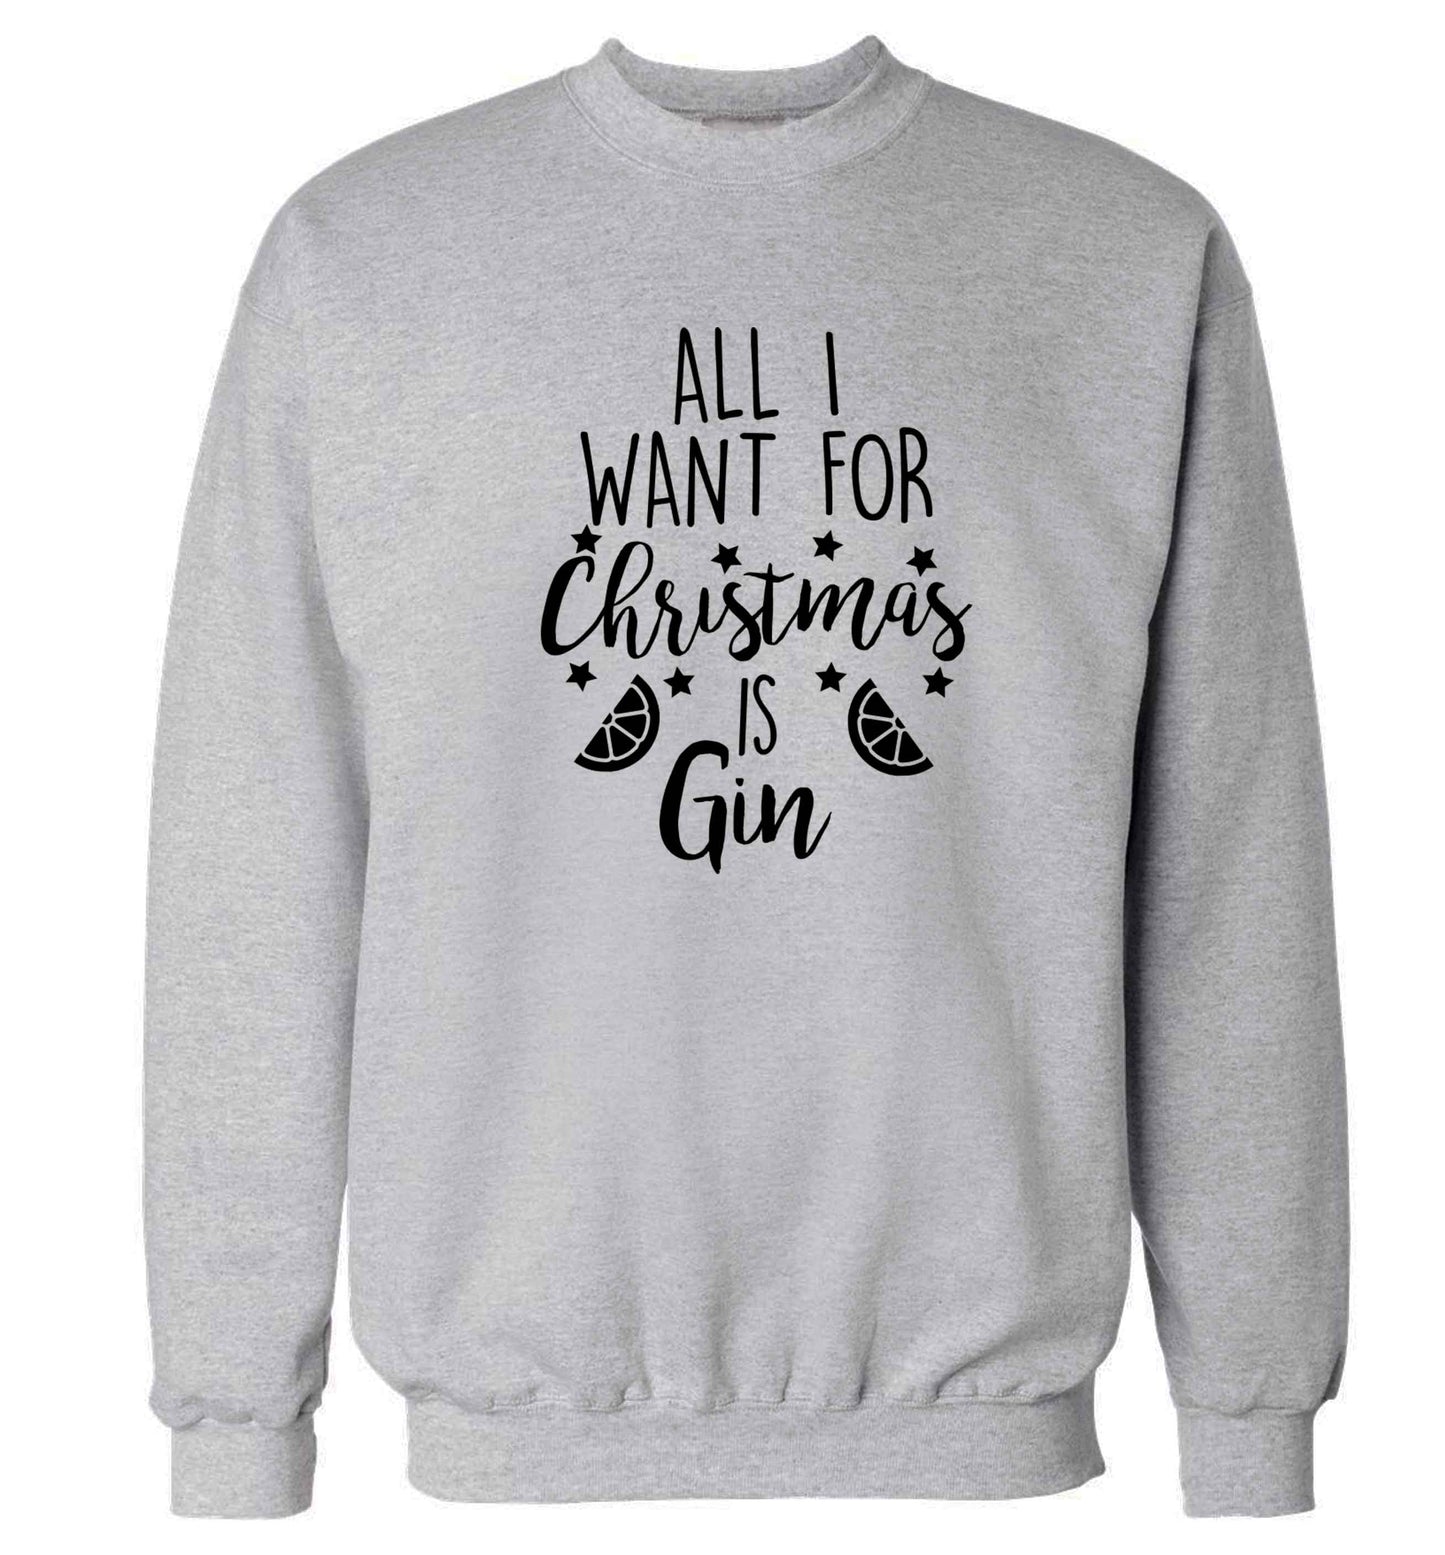 All I want for Christmas is gin Adult's unisex grey Sweater 2XL